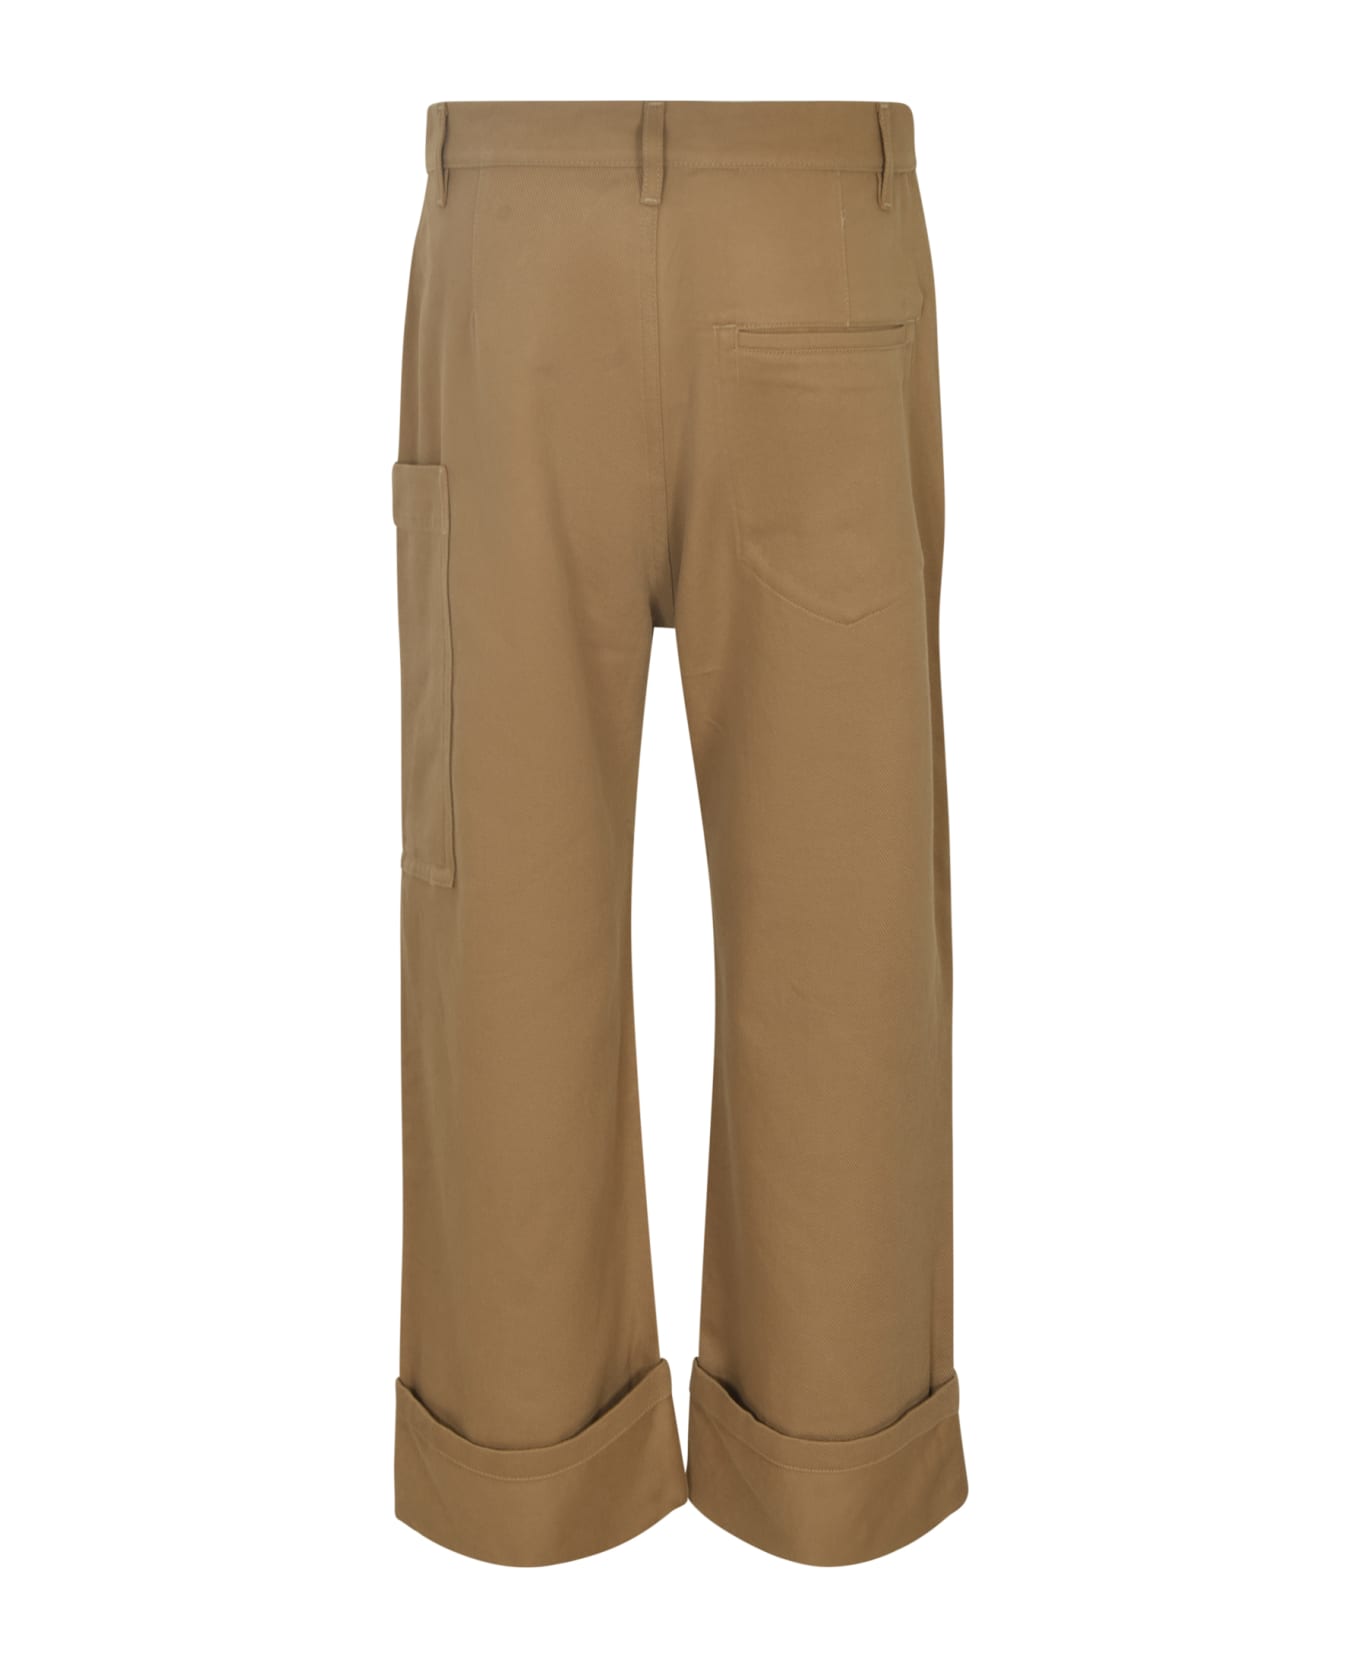 Sofie d'Hoore Straight Buttoned Trousers - Cardboard ボトムス